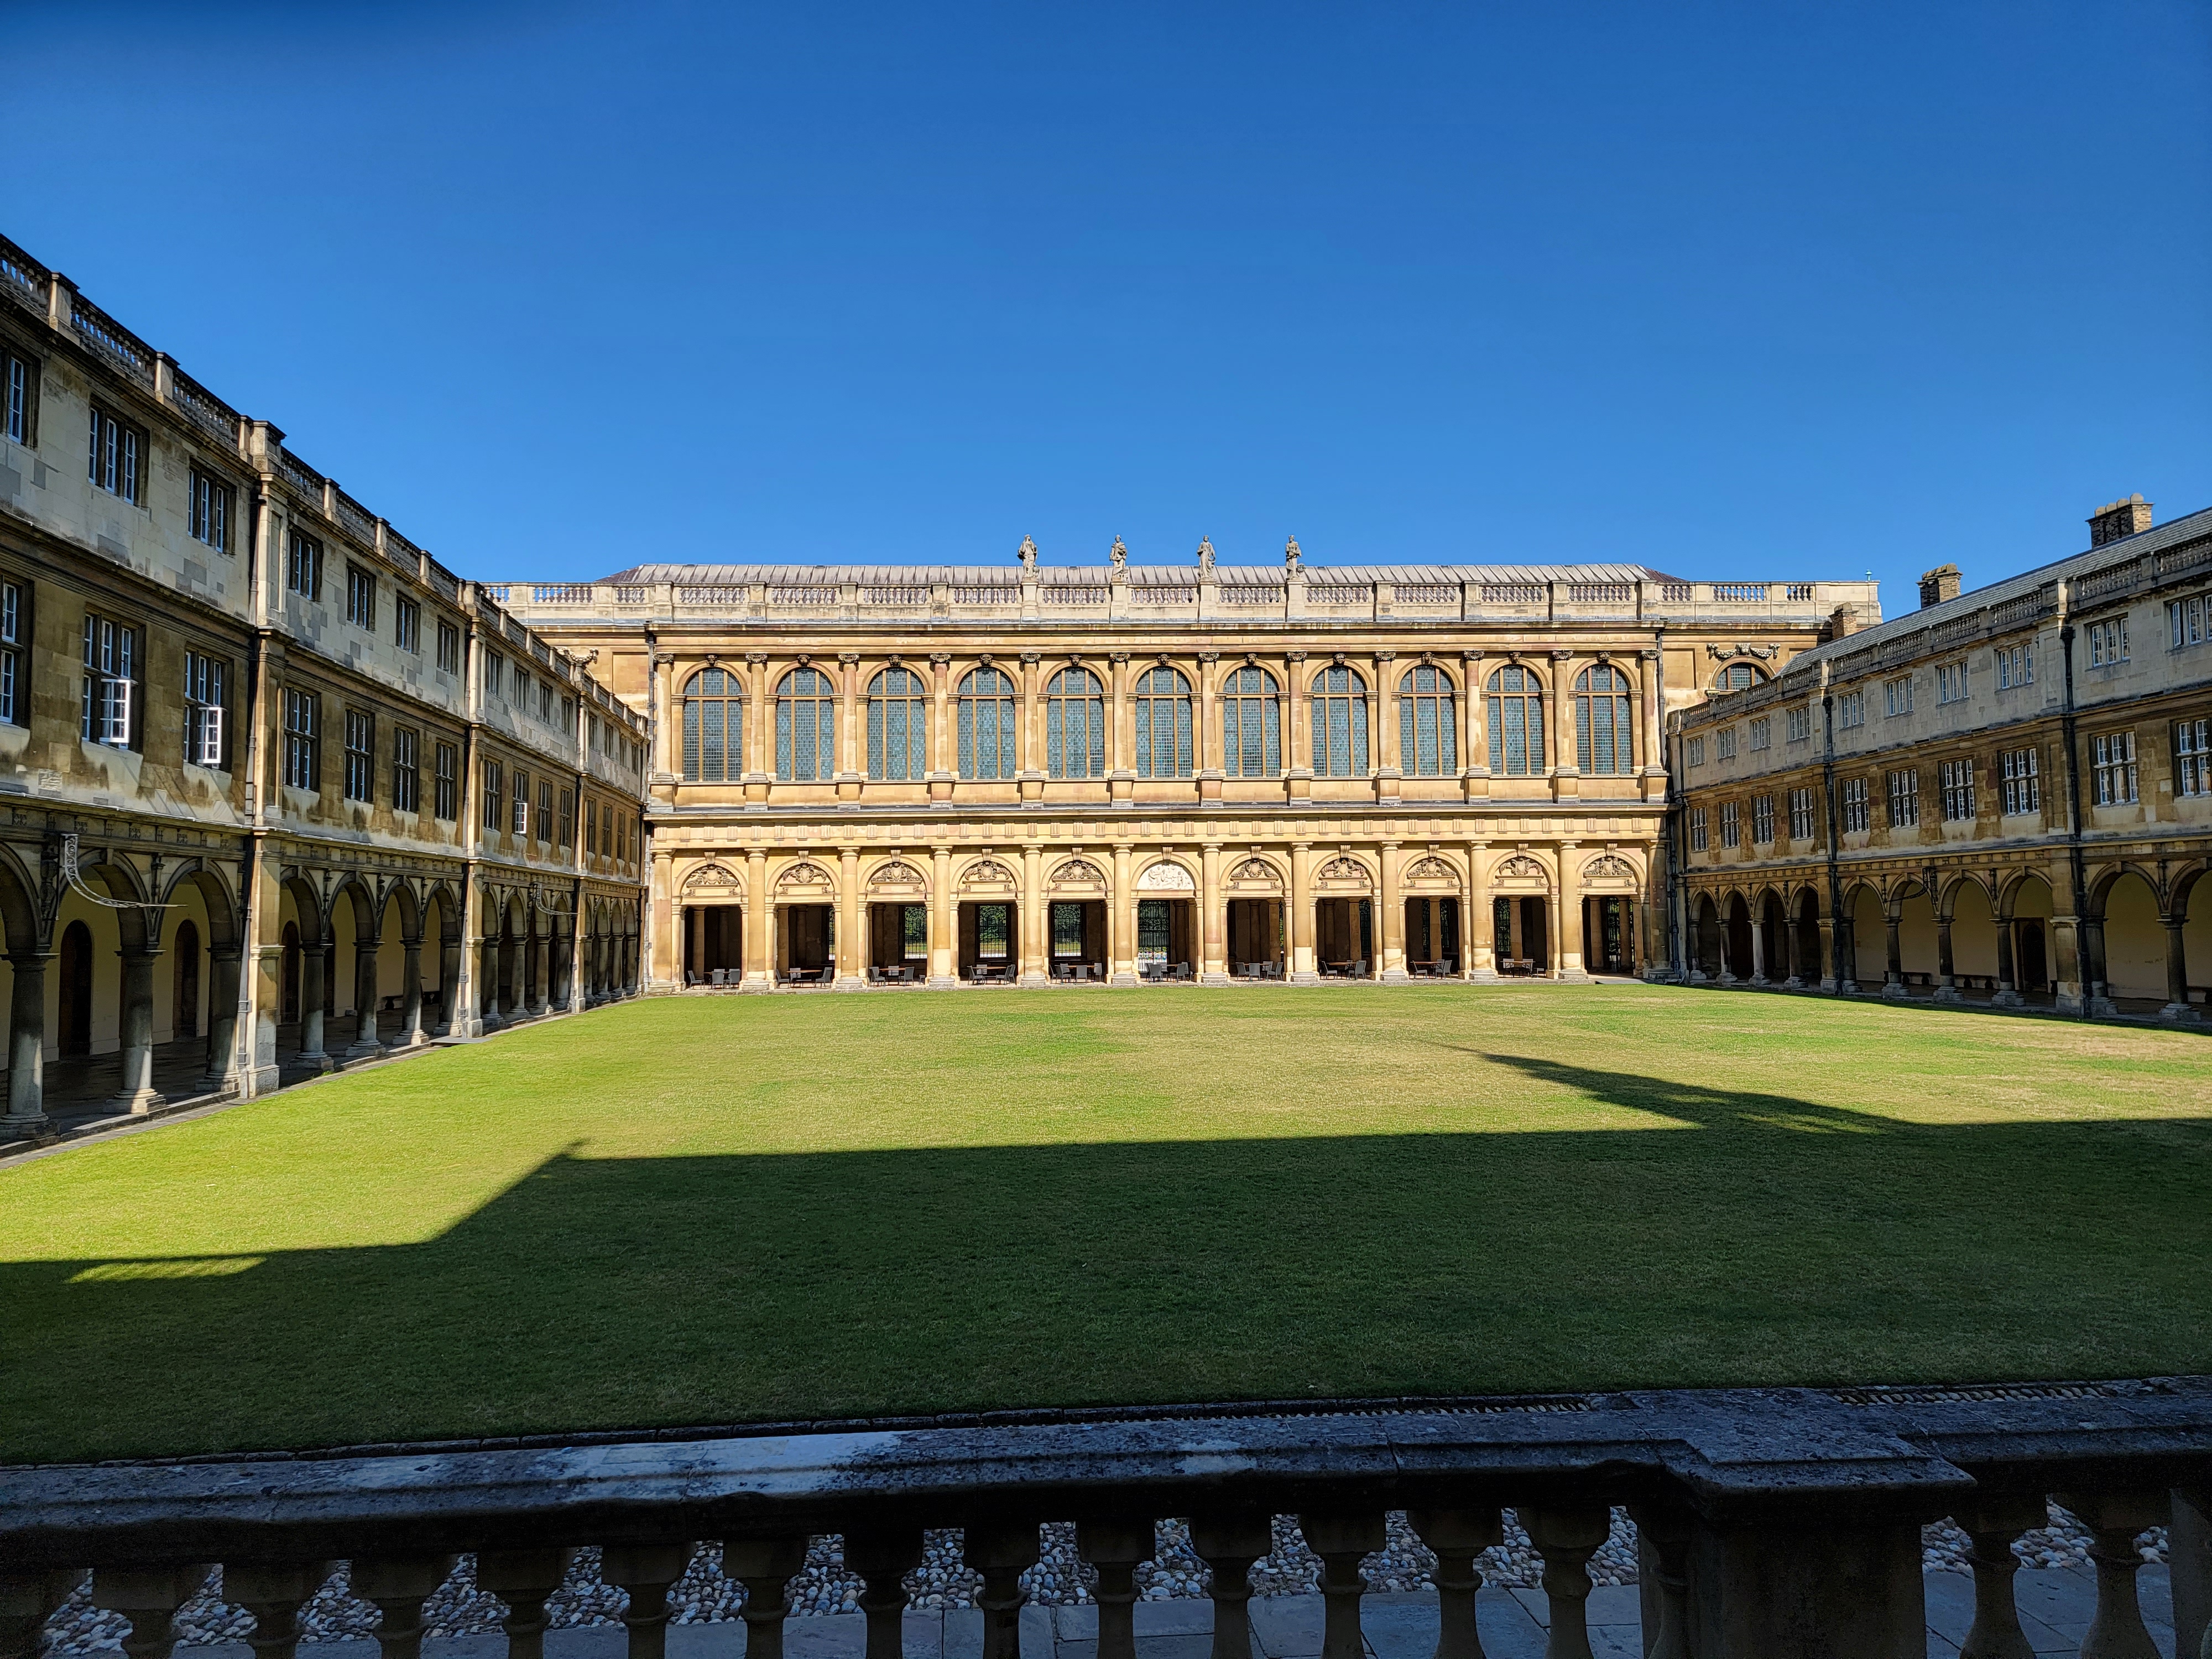 The Wren Library taken from opposite its place with Neville's Court in the foreground.